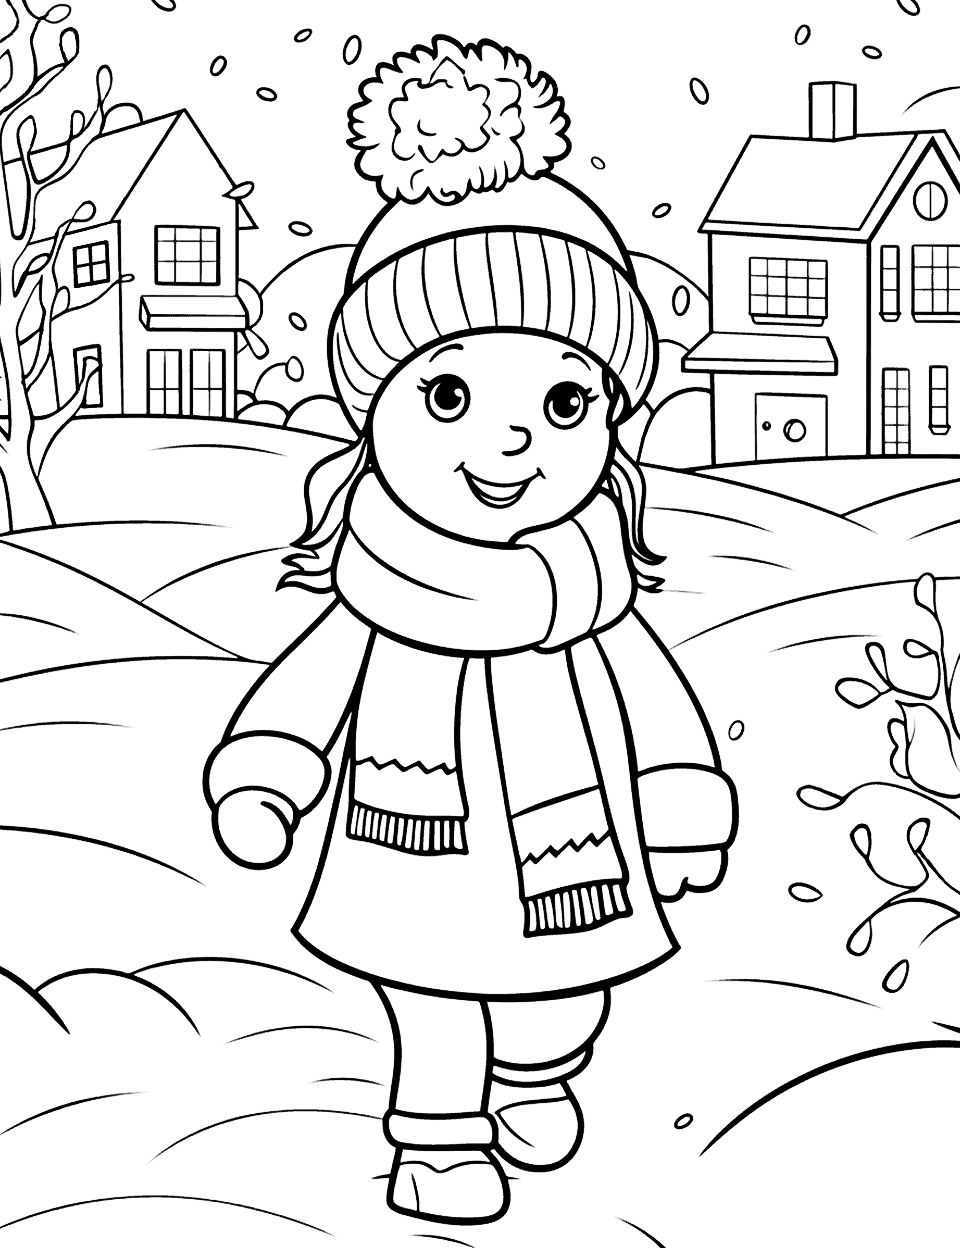 First Grade Frosty Morning Winter Coloring Page - A picture featuring the typical morning activities for a first grader on a frosty winter morning.